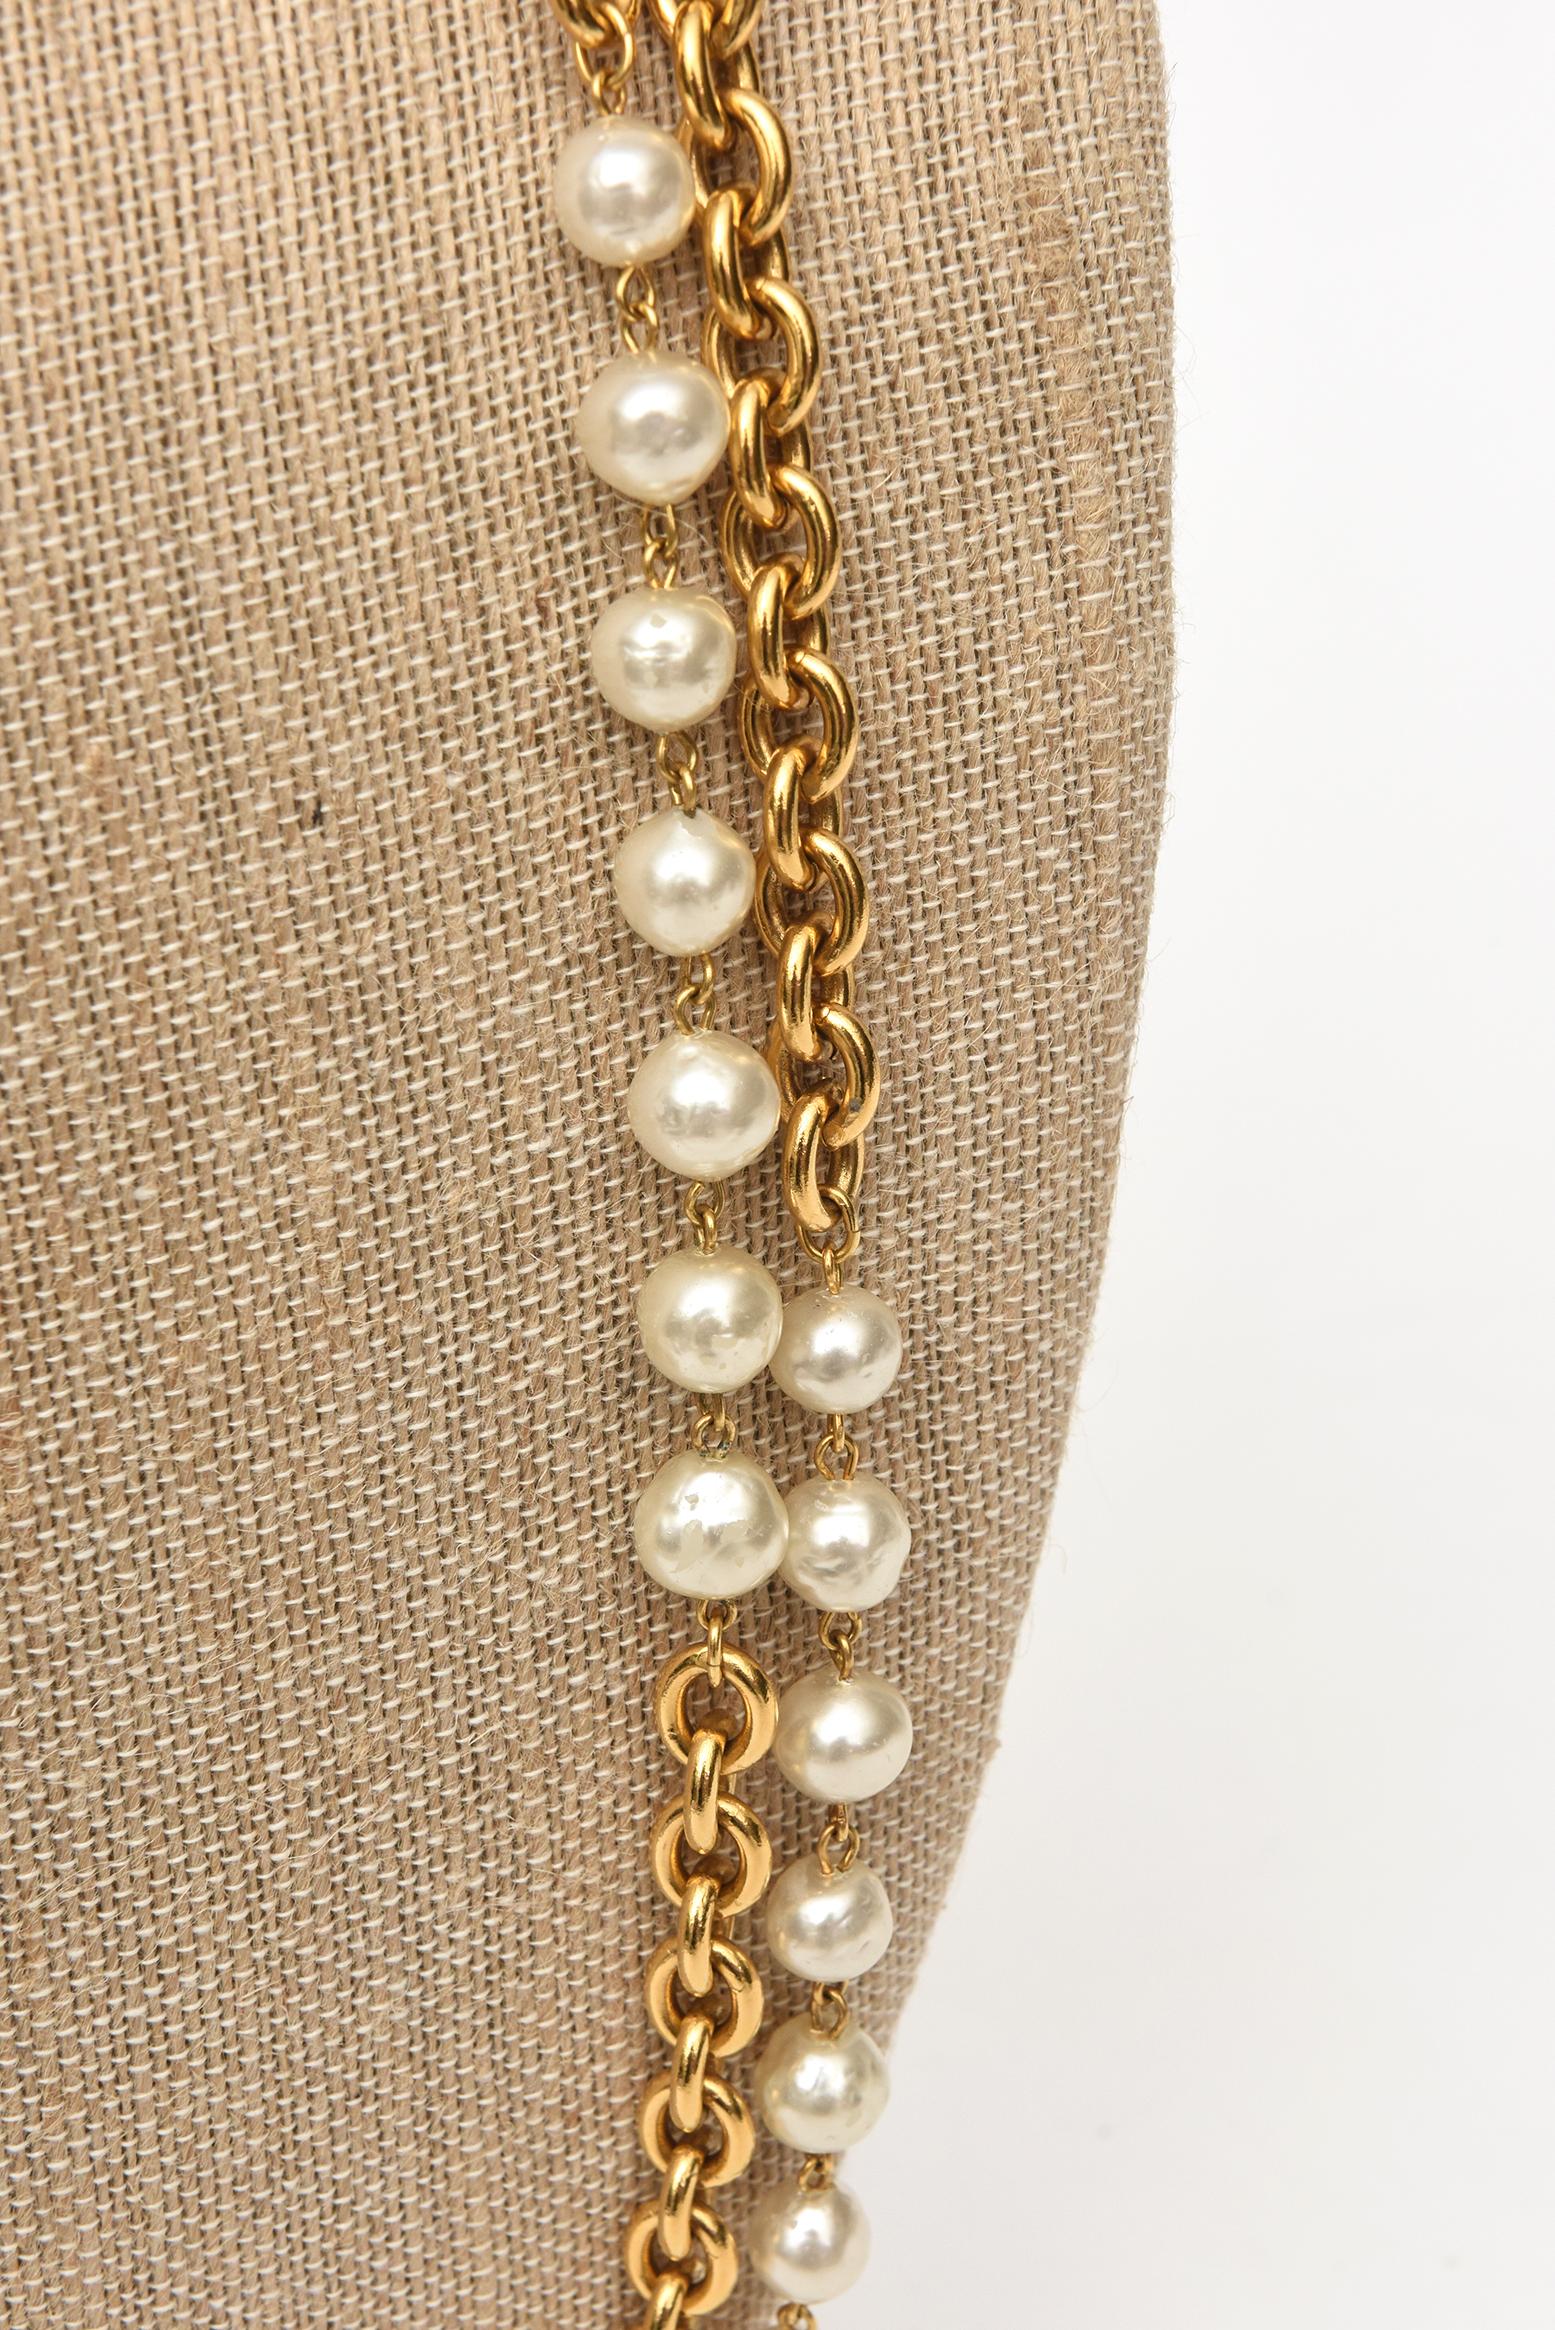 Women's Chanel Chain and Faux Pearl Long Double Strand Necklace